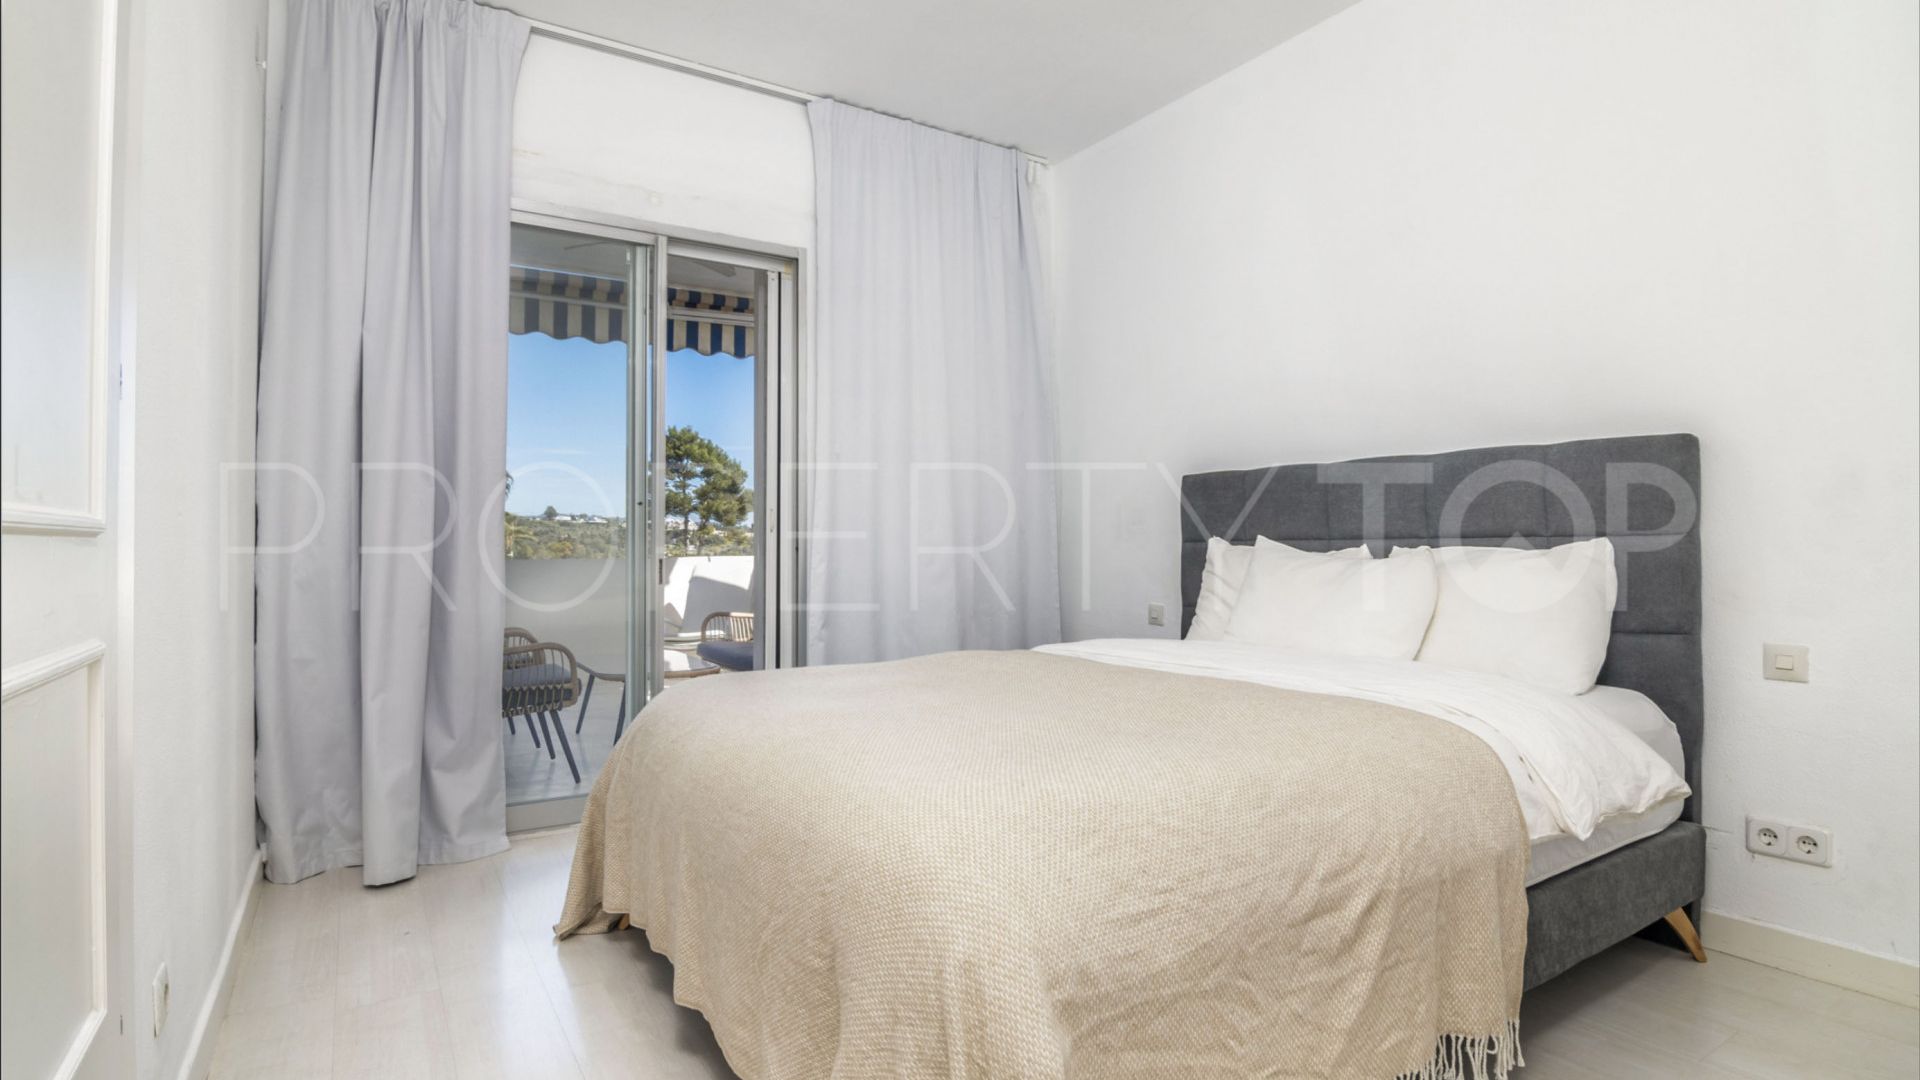 For sale Los Dragos duplex penthouse with 2 bedrooms